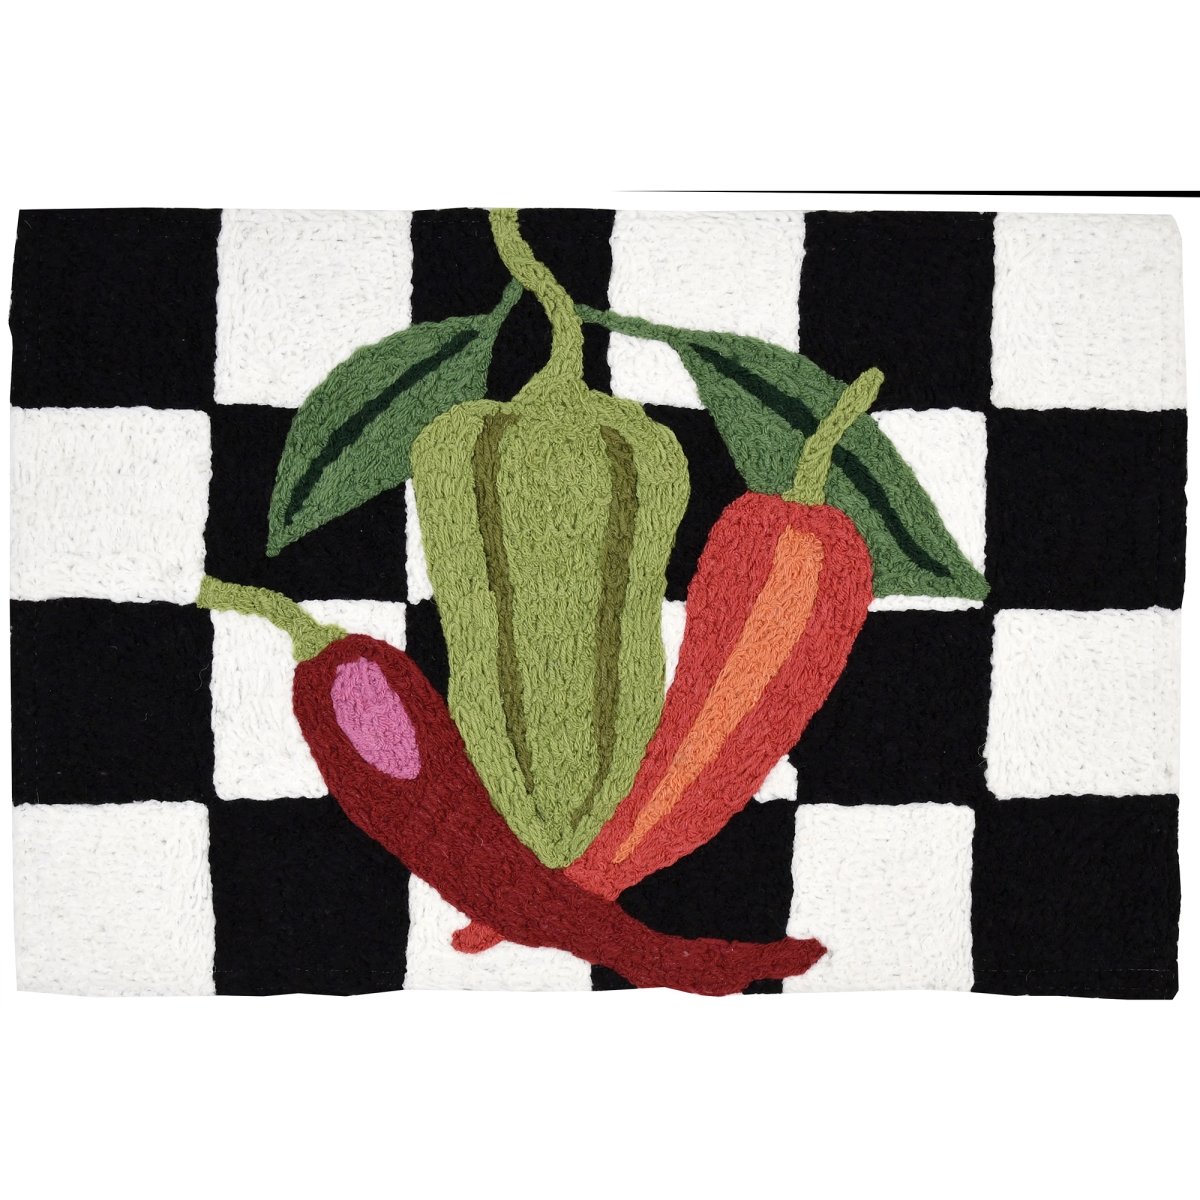 Jb-ssf010 20 X 30 In. Checkered Peppers Indoor & Outdoor Accent Rug